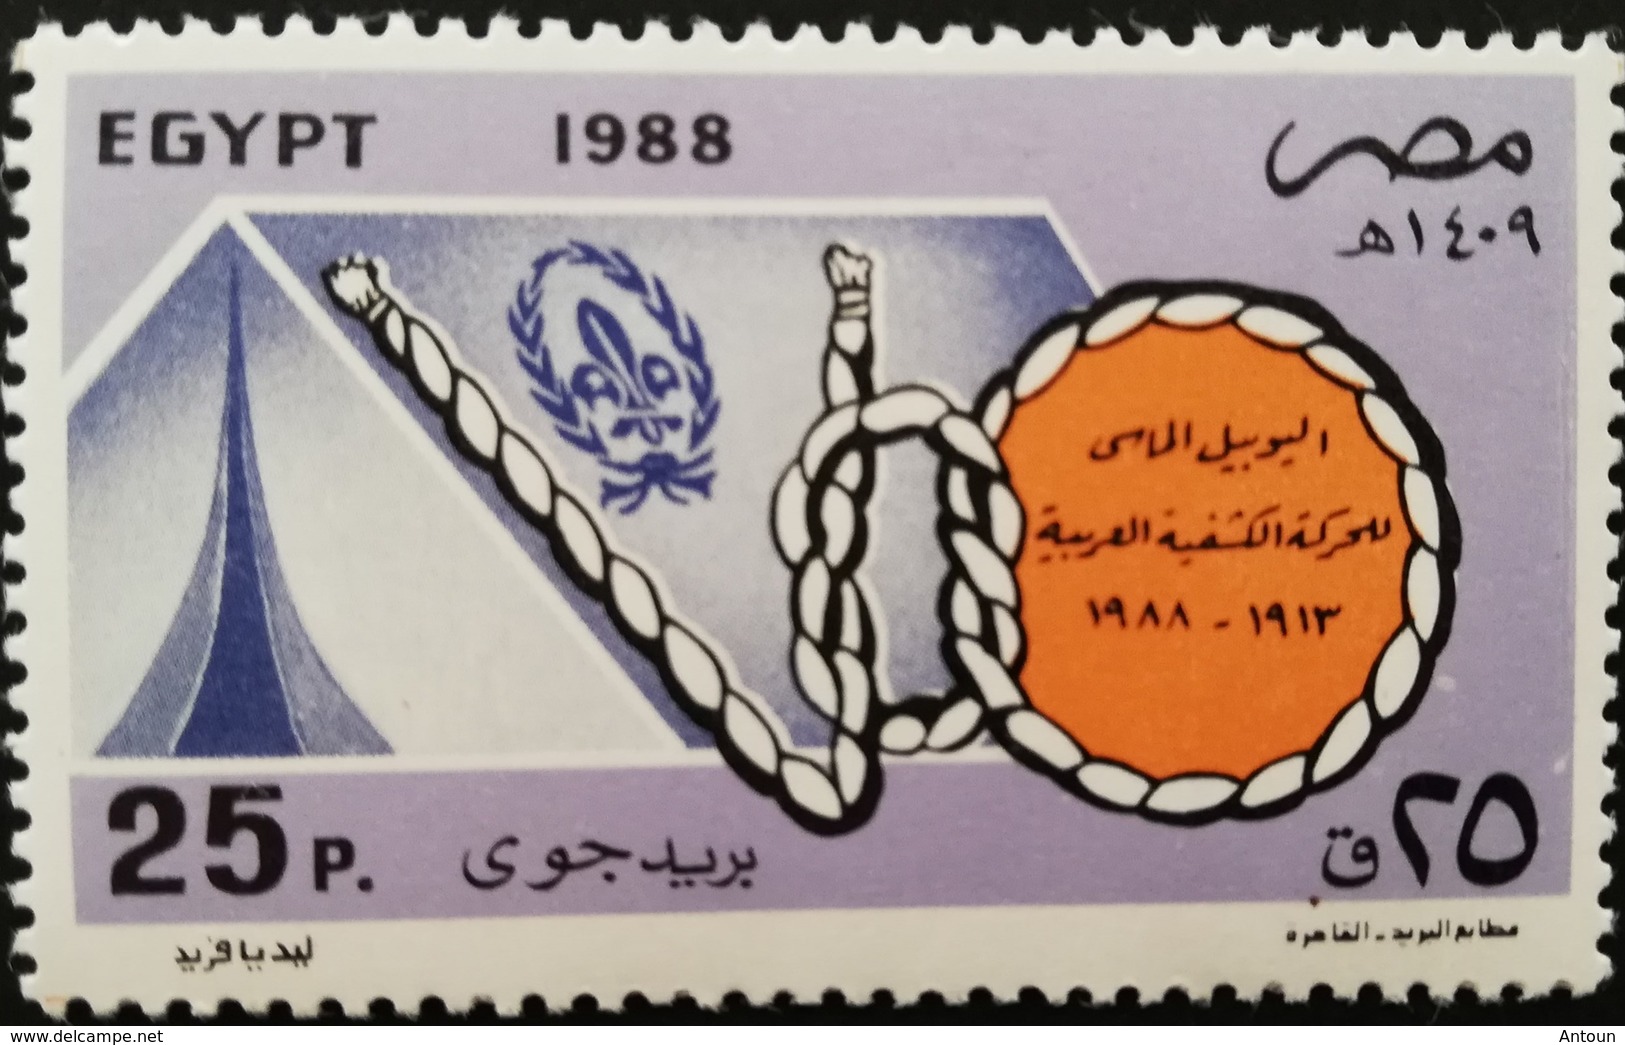 Egypt 1988 Arab Scouting Organization  POSTAGE TO BE ADDED ON ALL ITEMS - Ungebraucht